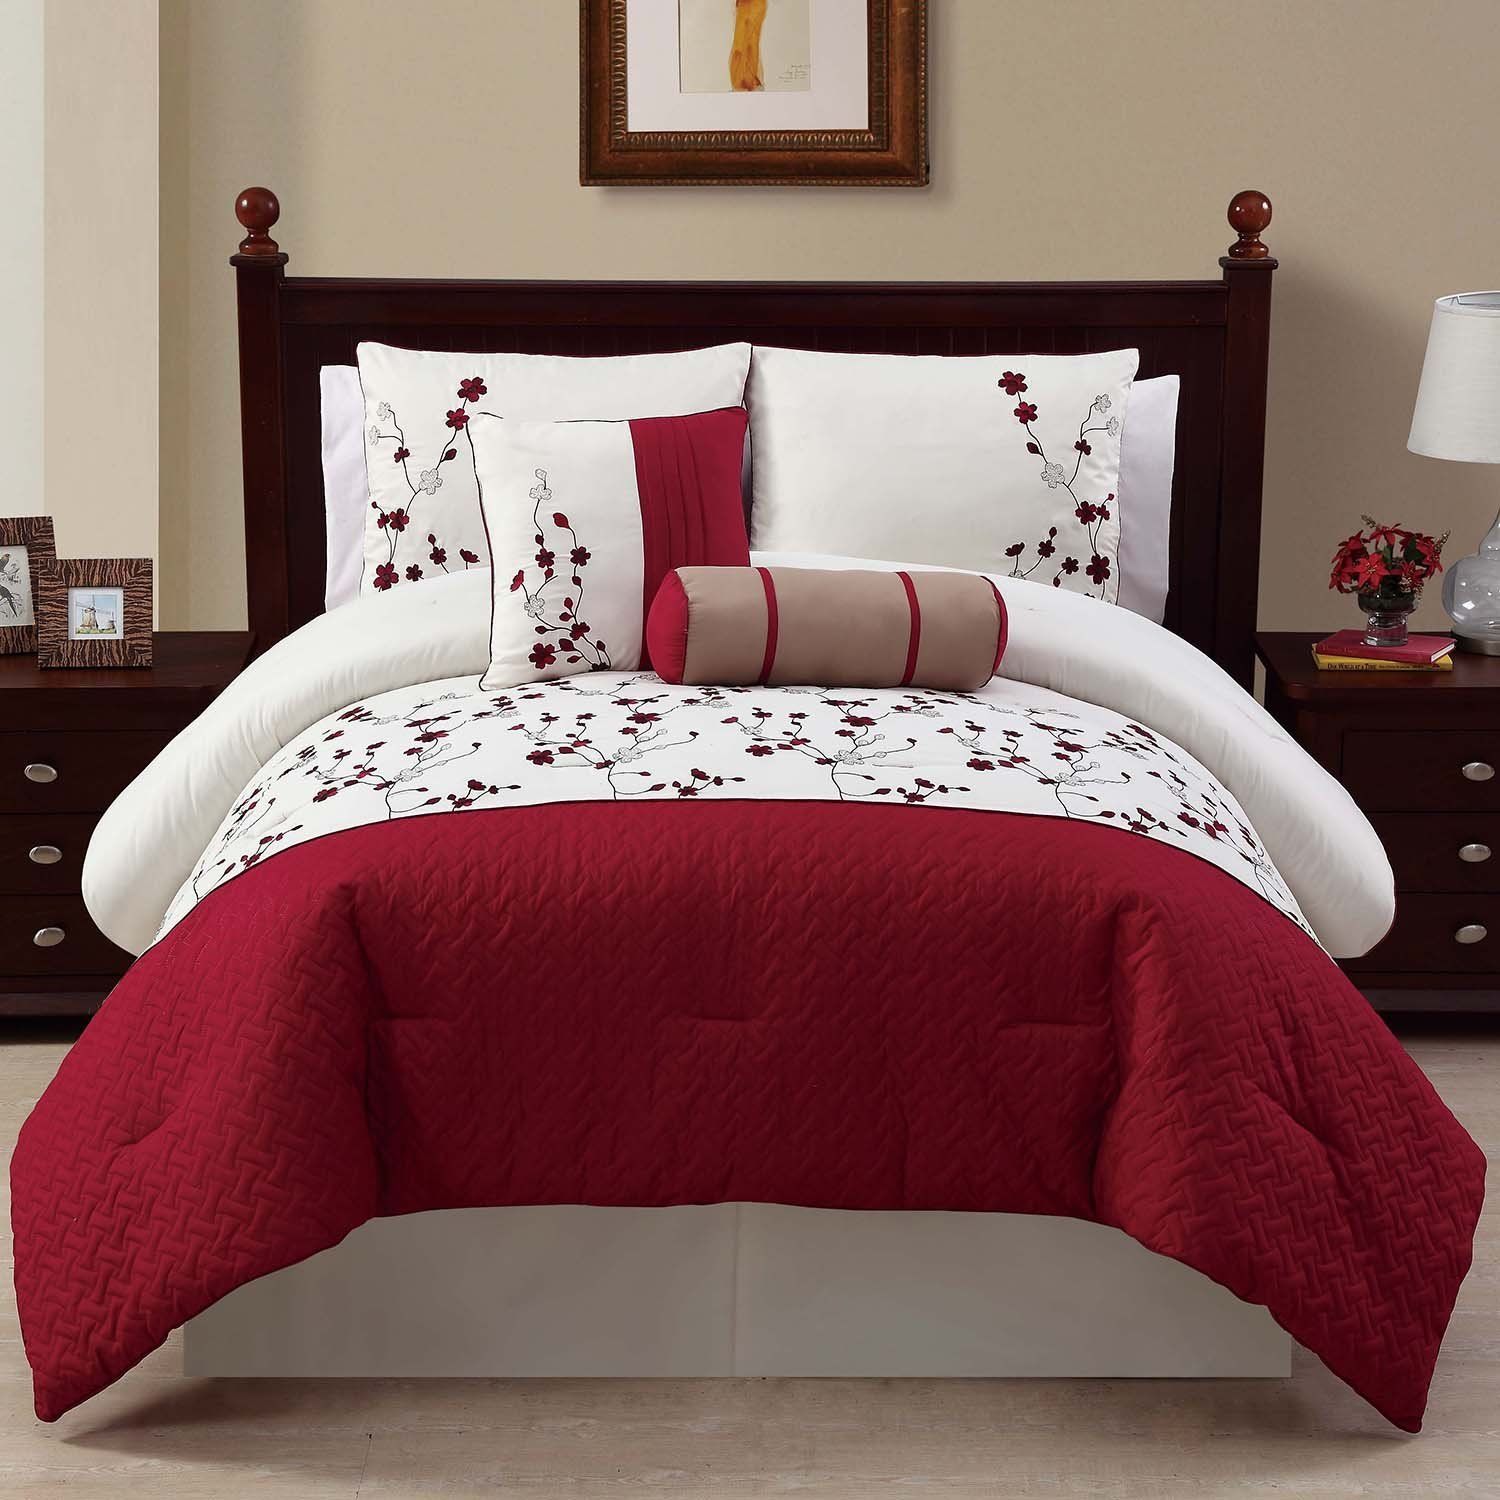 best of Bedding set style Asian